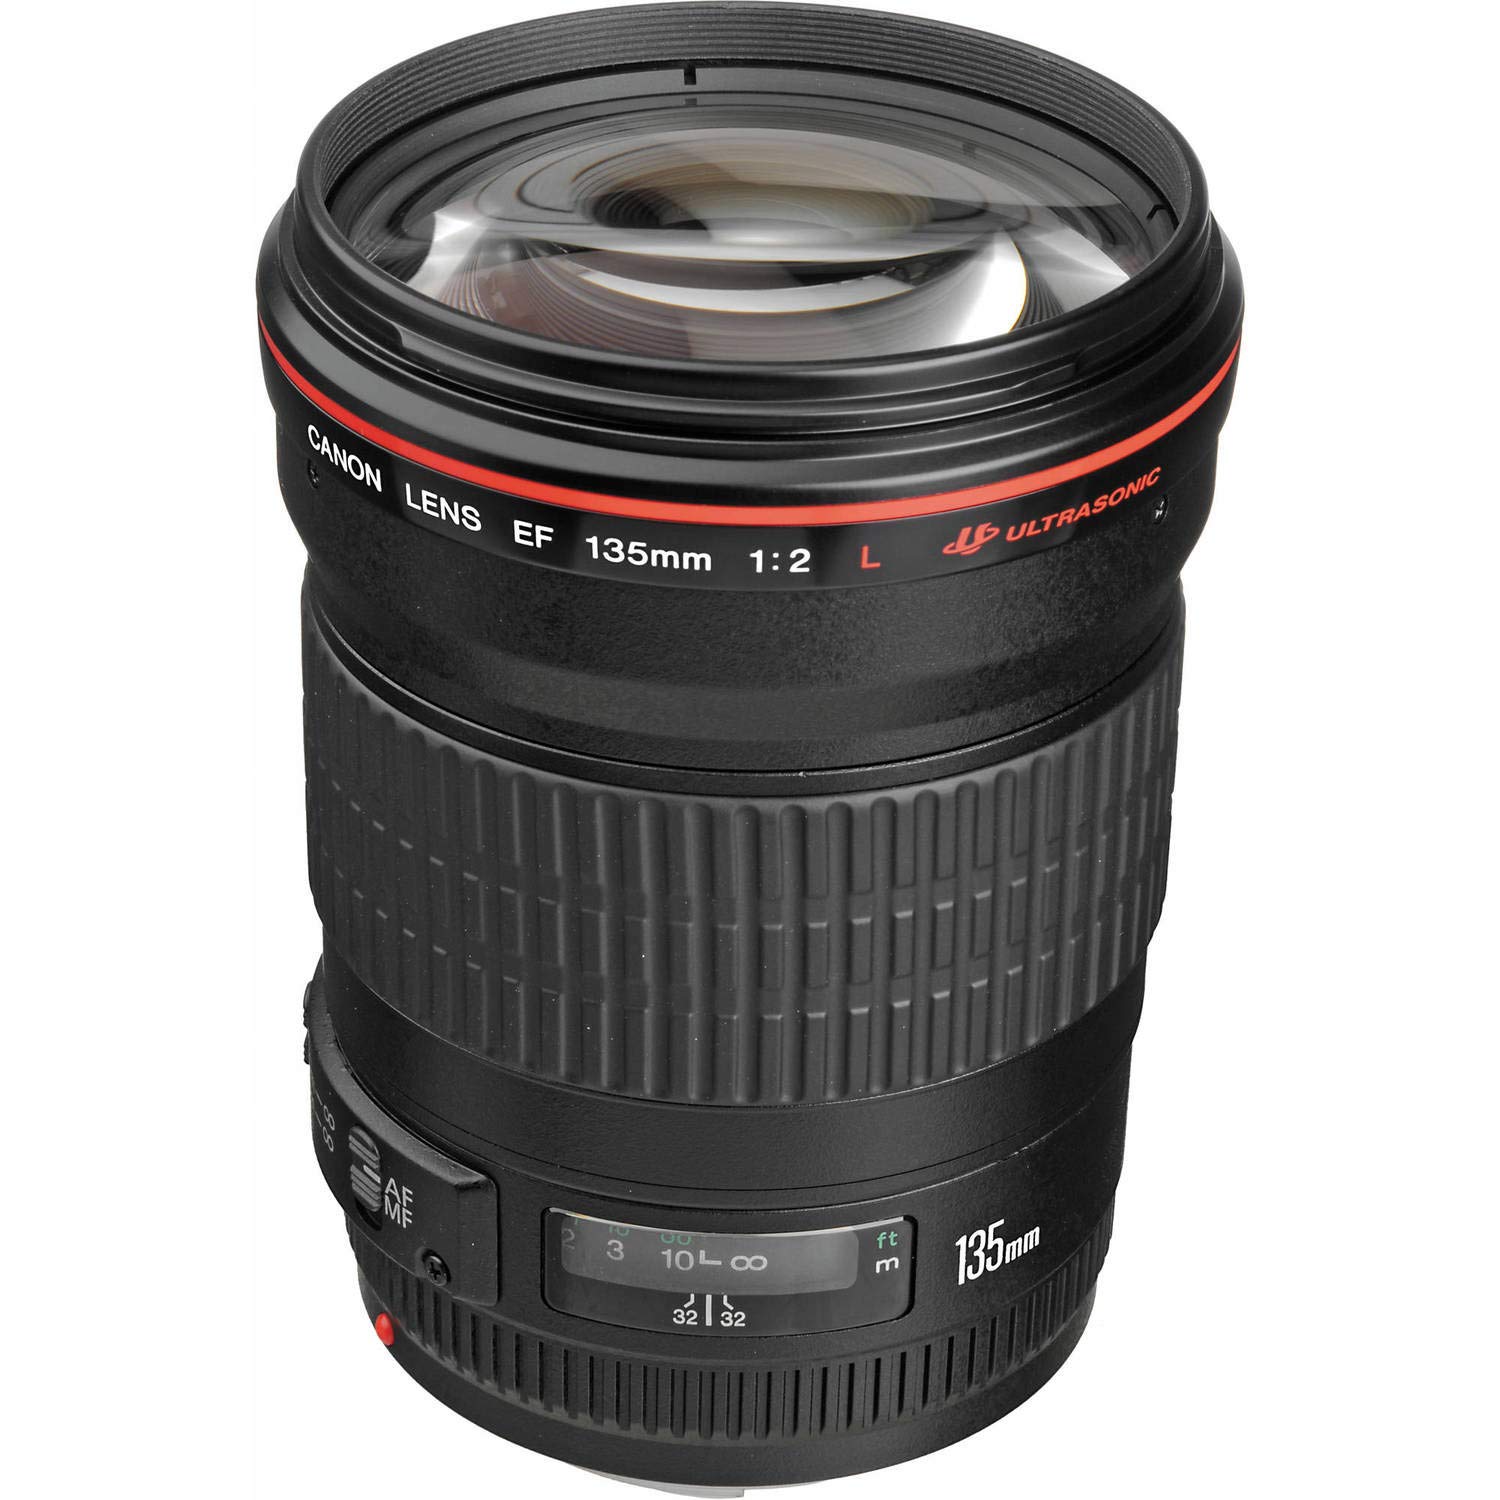 Canon EF 135mm f/2L USM Lens (Intl Model) with Cleaning Kit